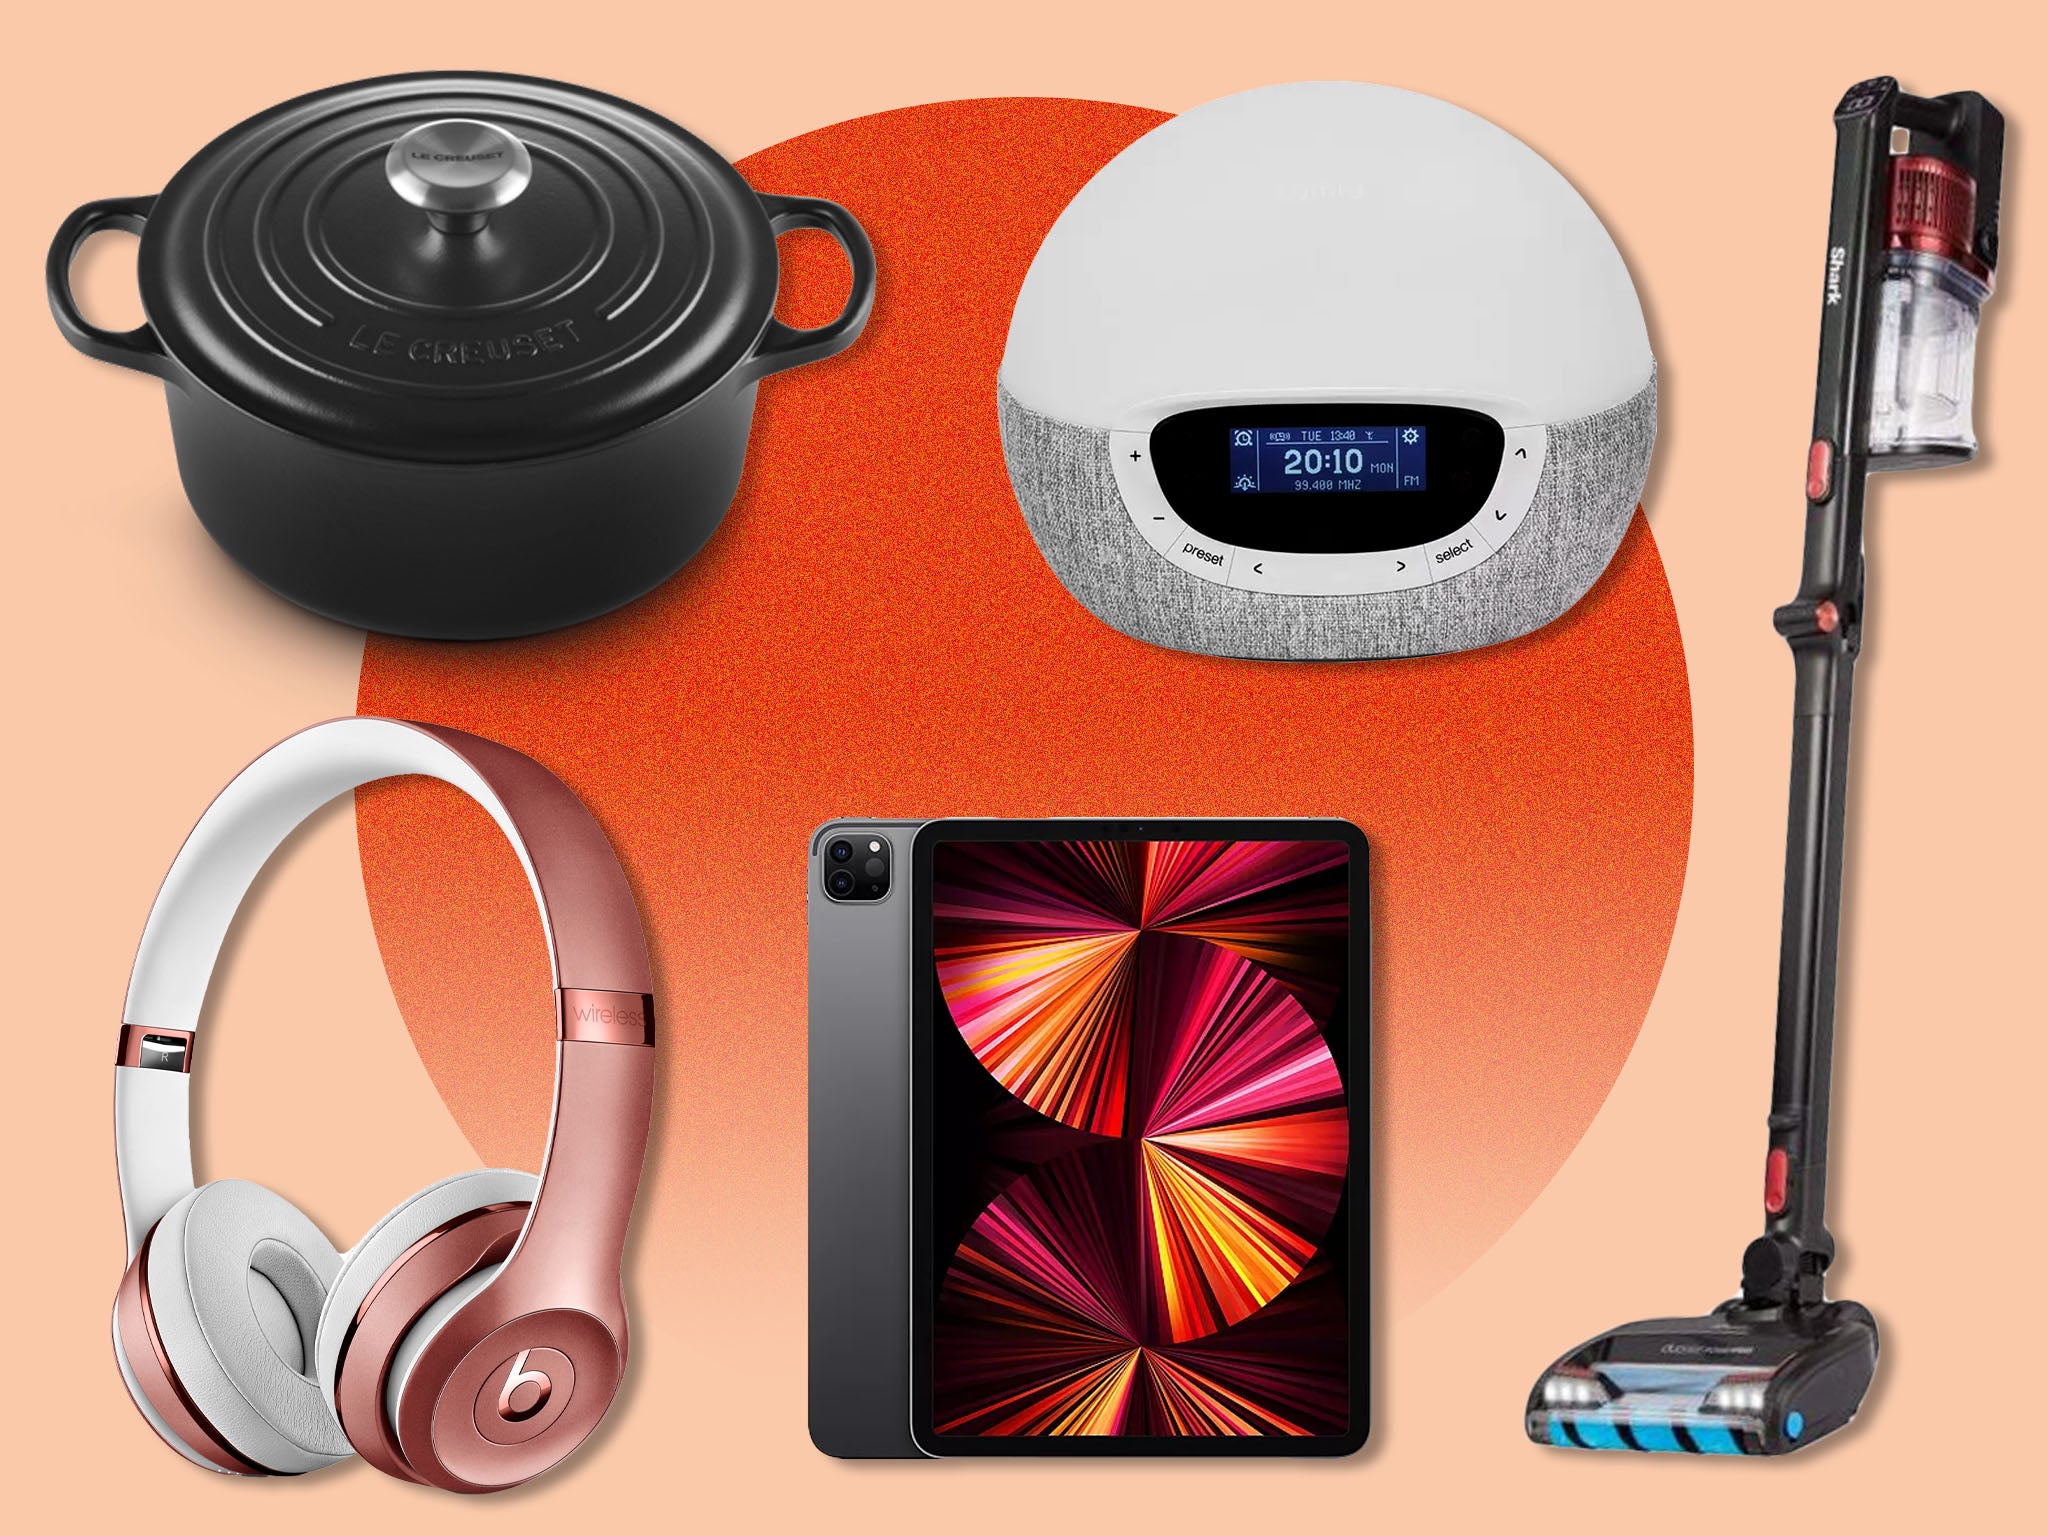 There’s still time to shop deals on big-name brands like Beats, Le Creuset, Shark, Samsung and more